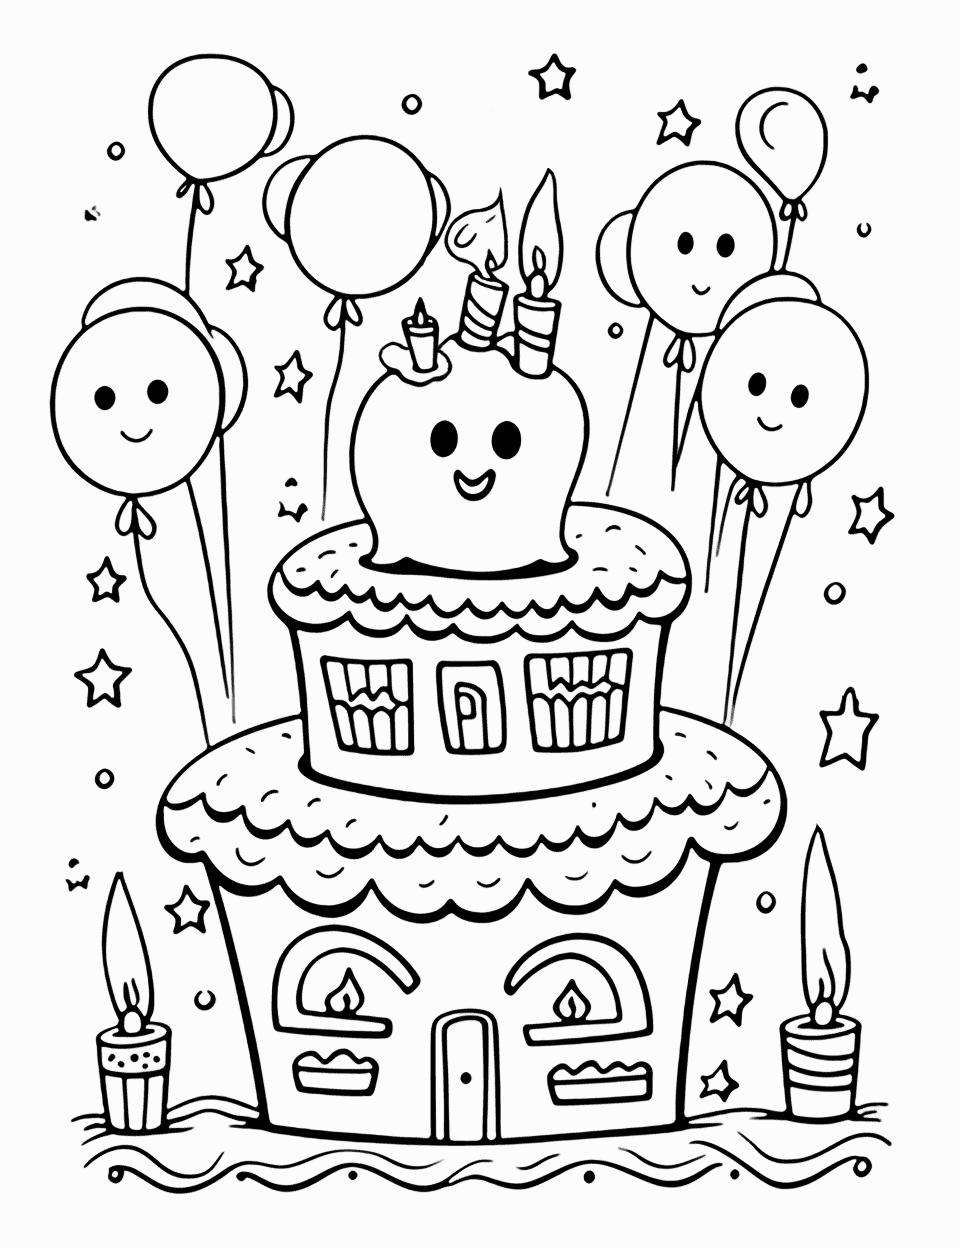 Happy birthday coloring pages free printables